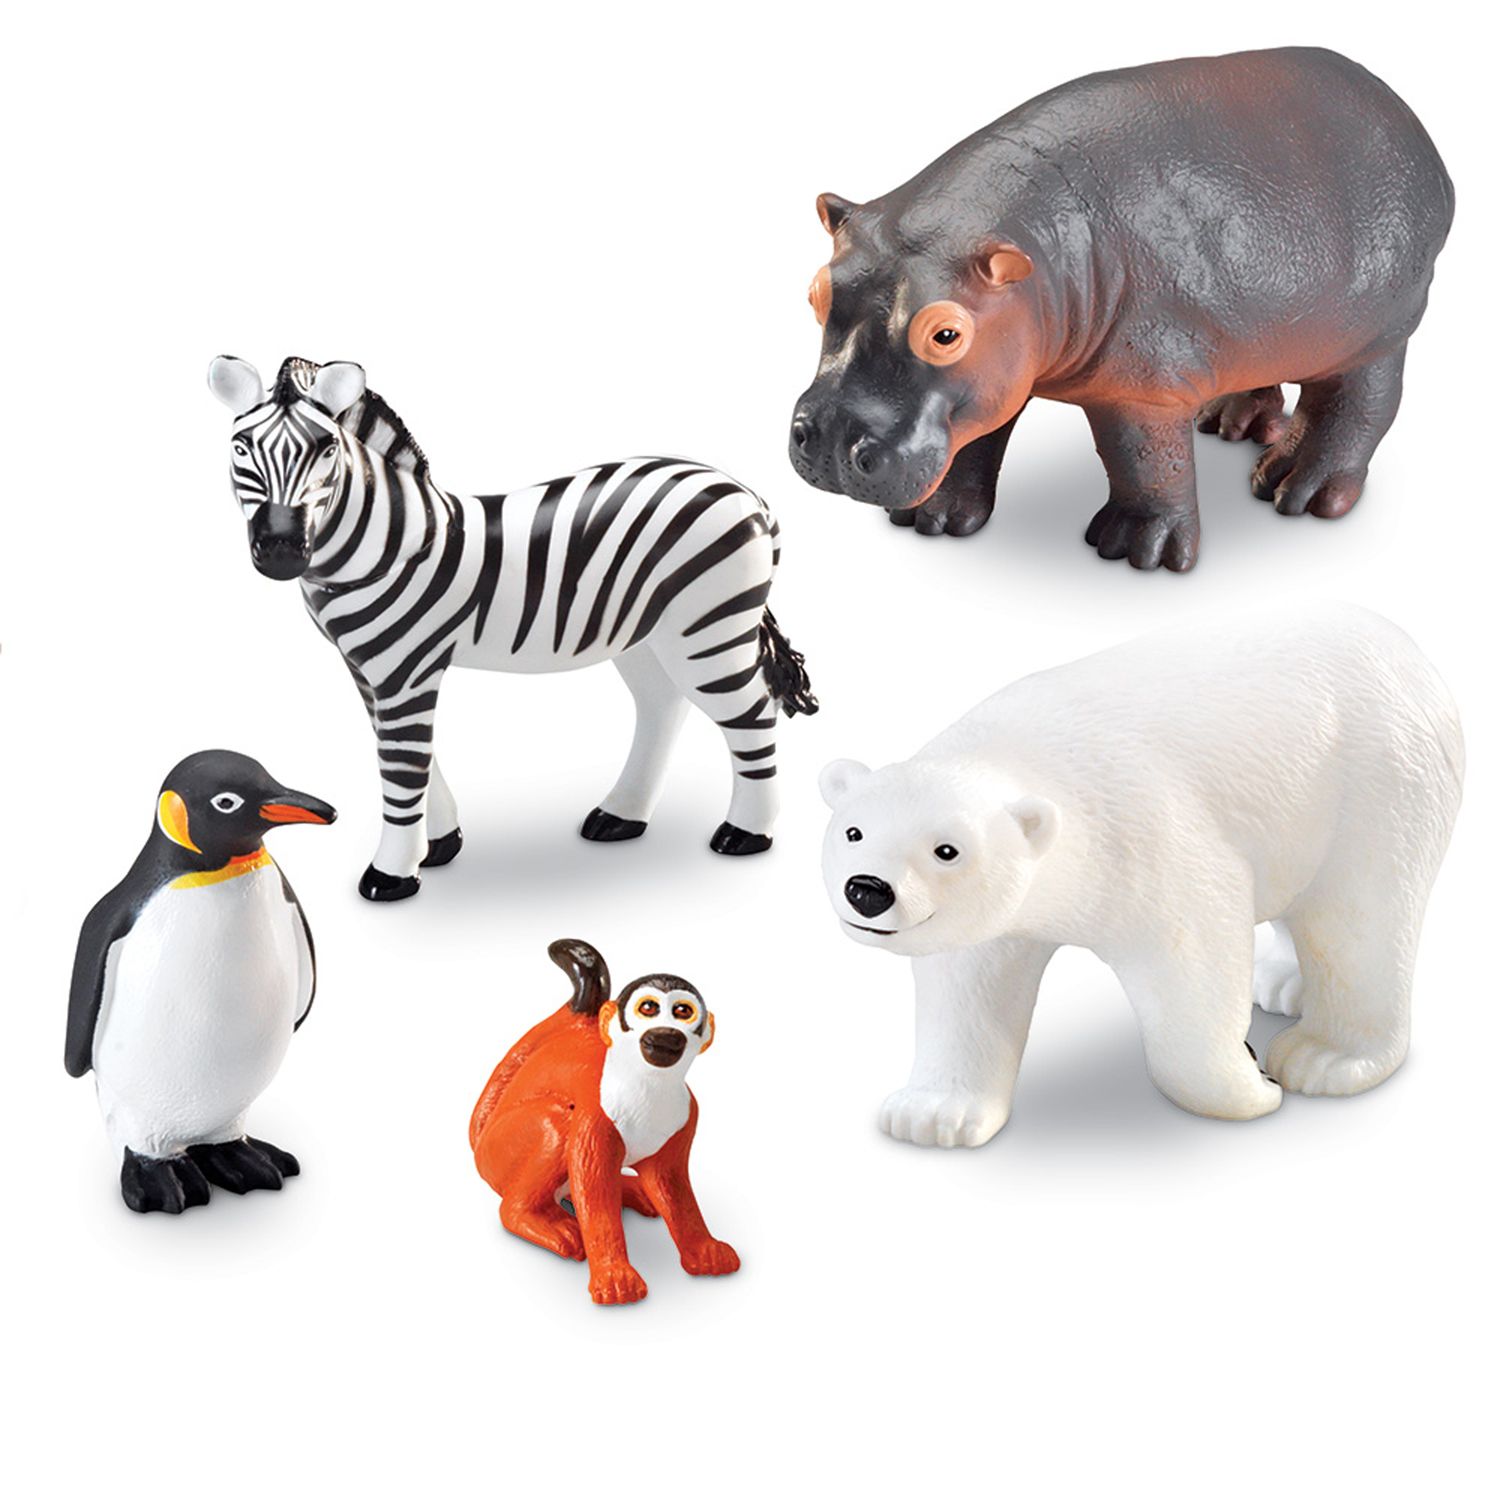 Image for Learning Resources 5-pc. Jumbo Zoo Animals at Kohl's.